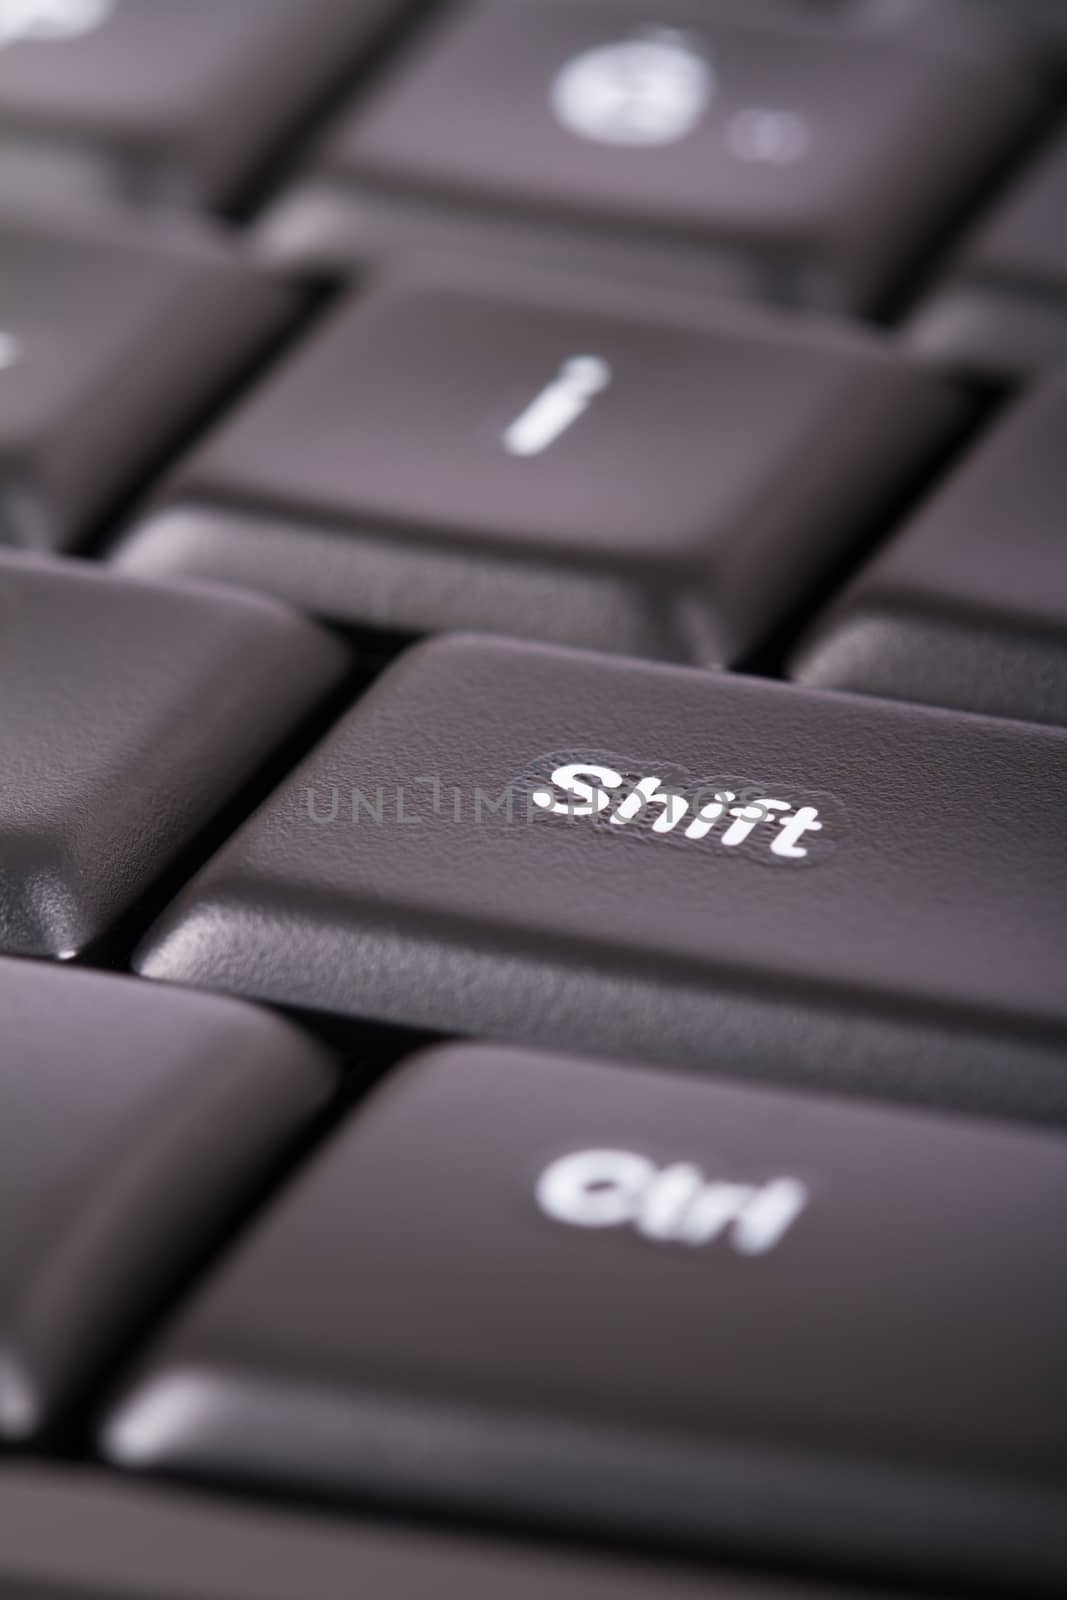 Close up view of shift button on black computer keyboard.